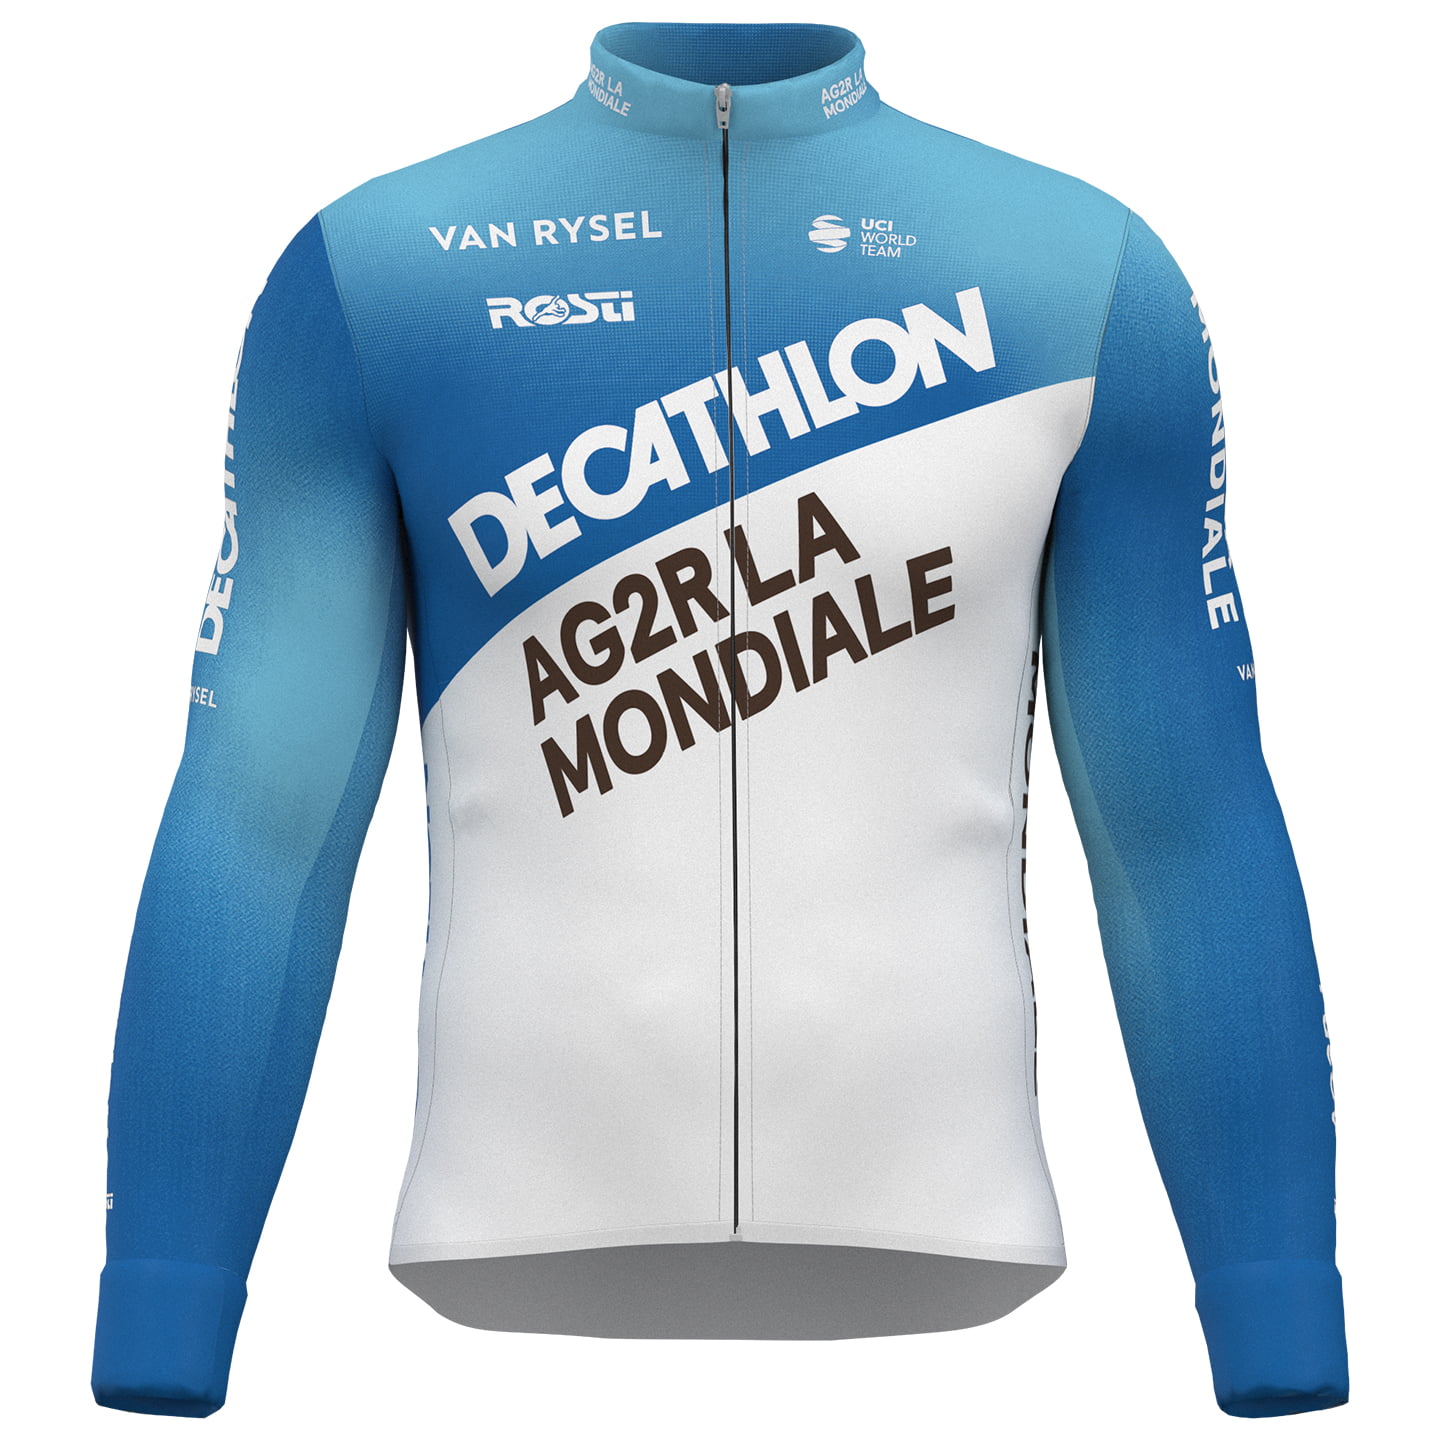 DECATHLON AG2R LA MONDIALE 2024 Long Sleeve Jersey, for men, size M, Cycle jersey, Cycling clothing